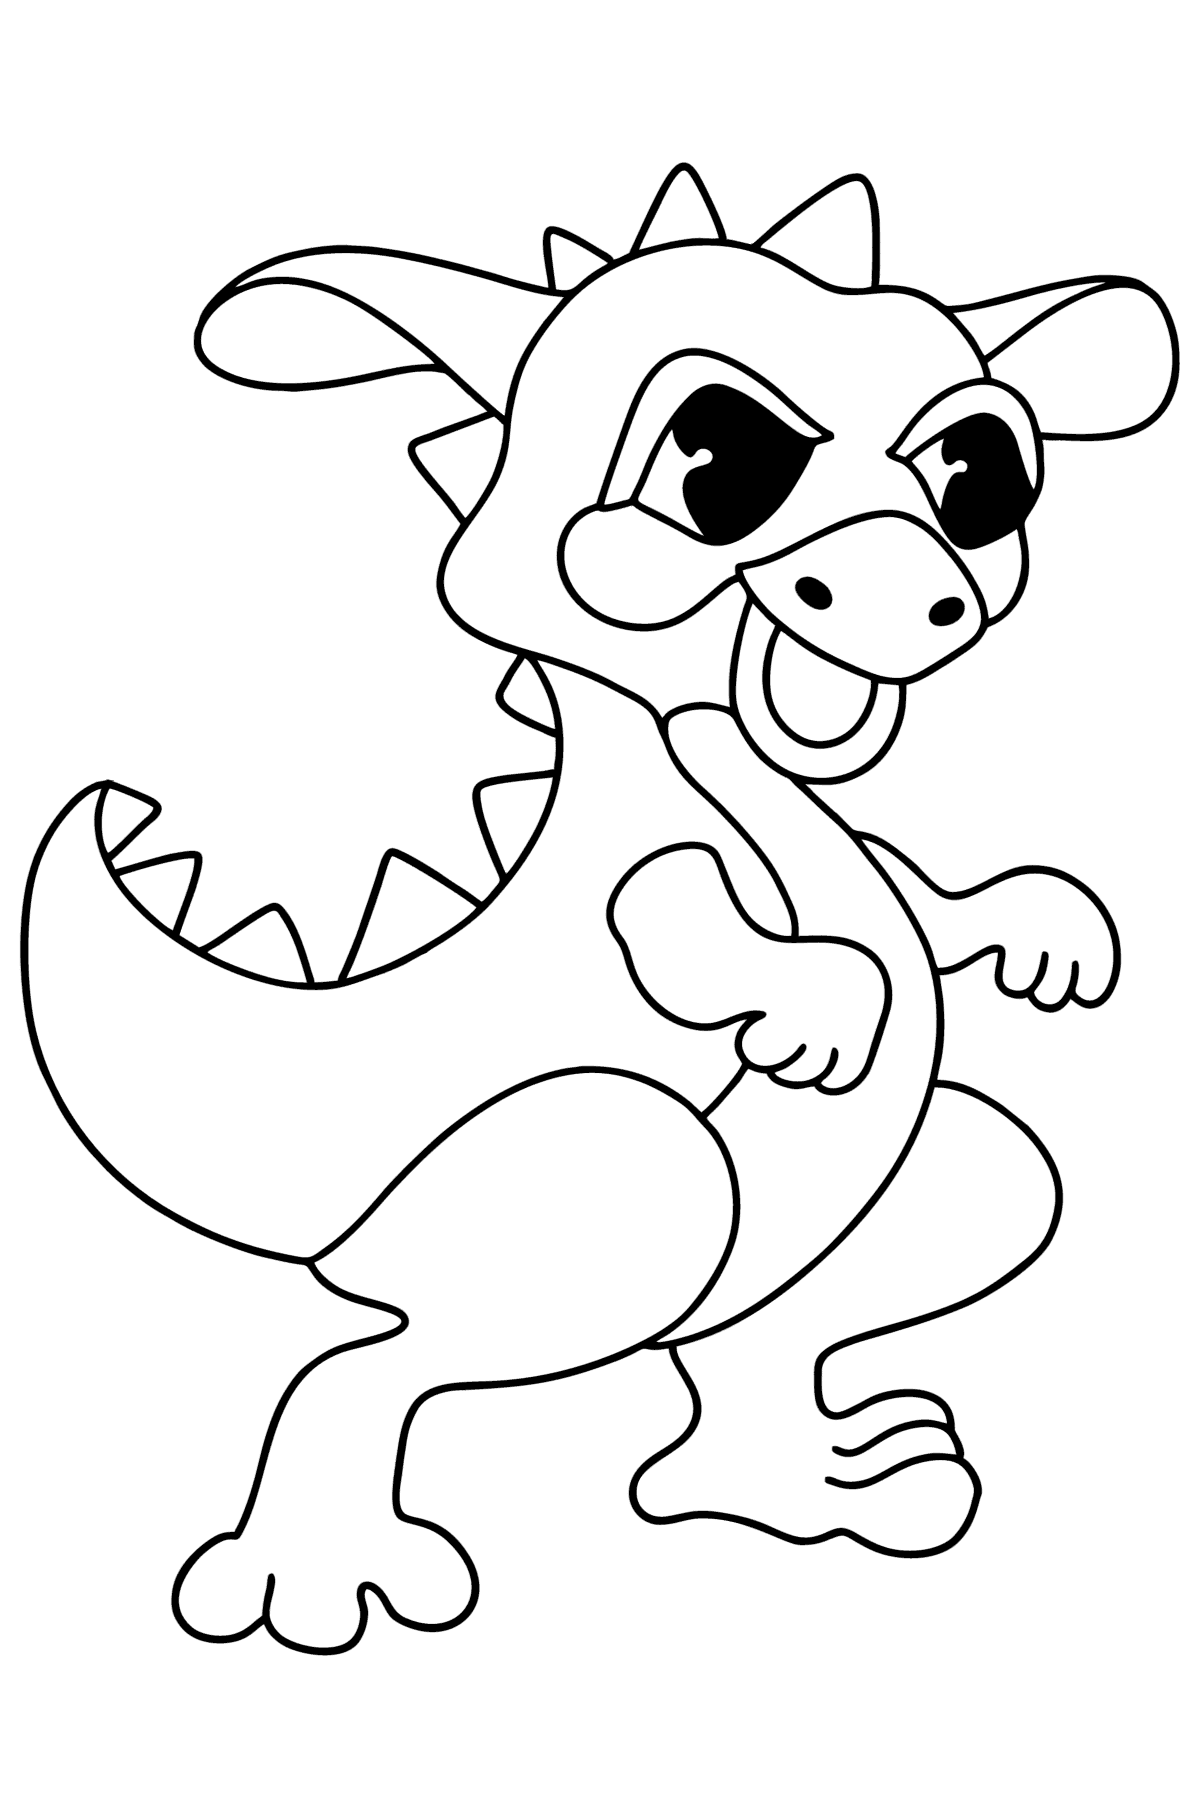 Cartoon dragon coloring page - Coloring Pages for Kids